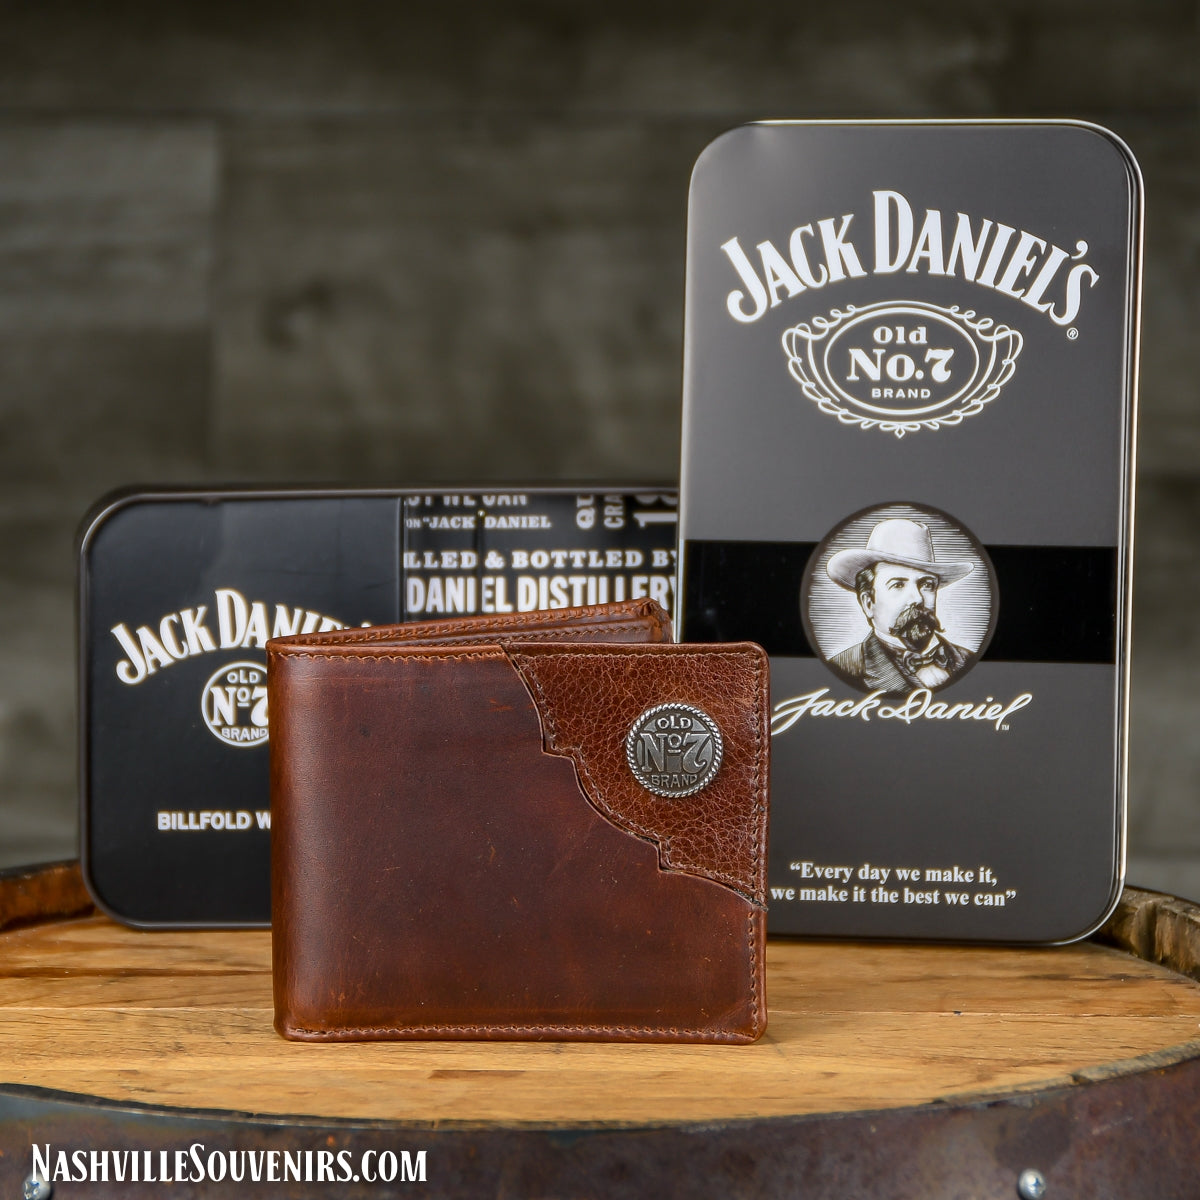 Officially licensed Jack Daniels Billfold Wallet in Natural Leather with Old No.7 Medallion. Get one today with FREE SHIPPING on all US orders over $75!